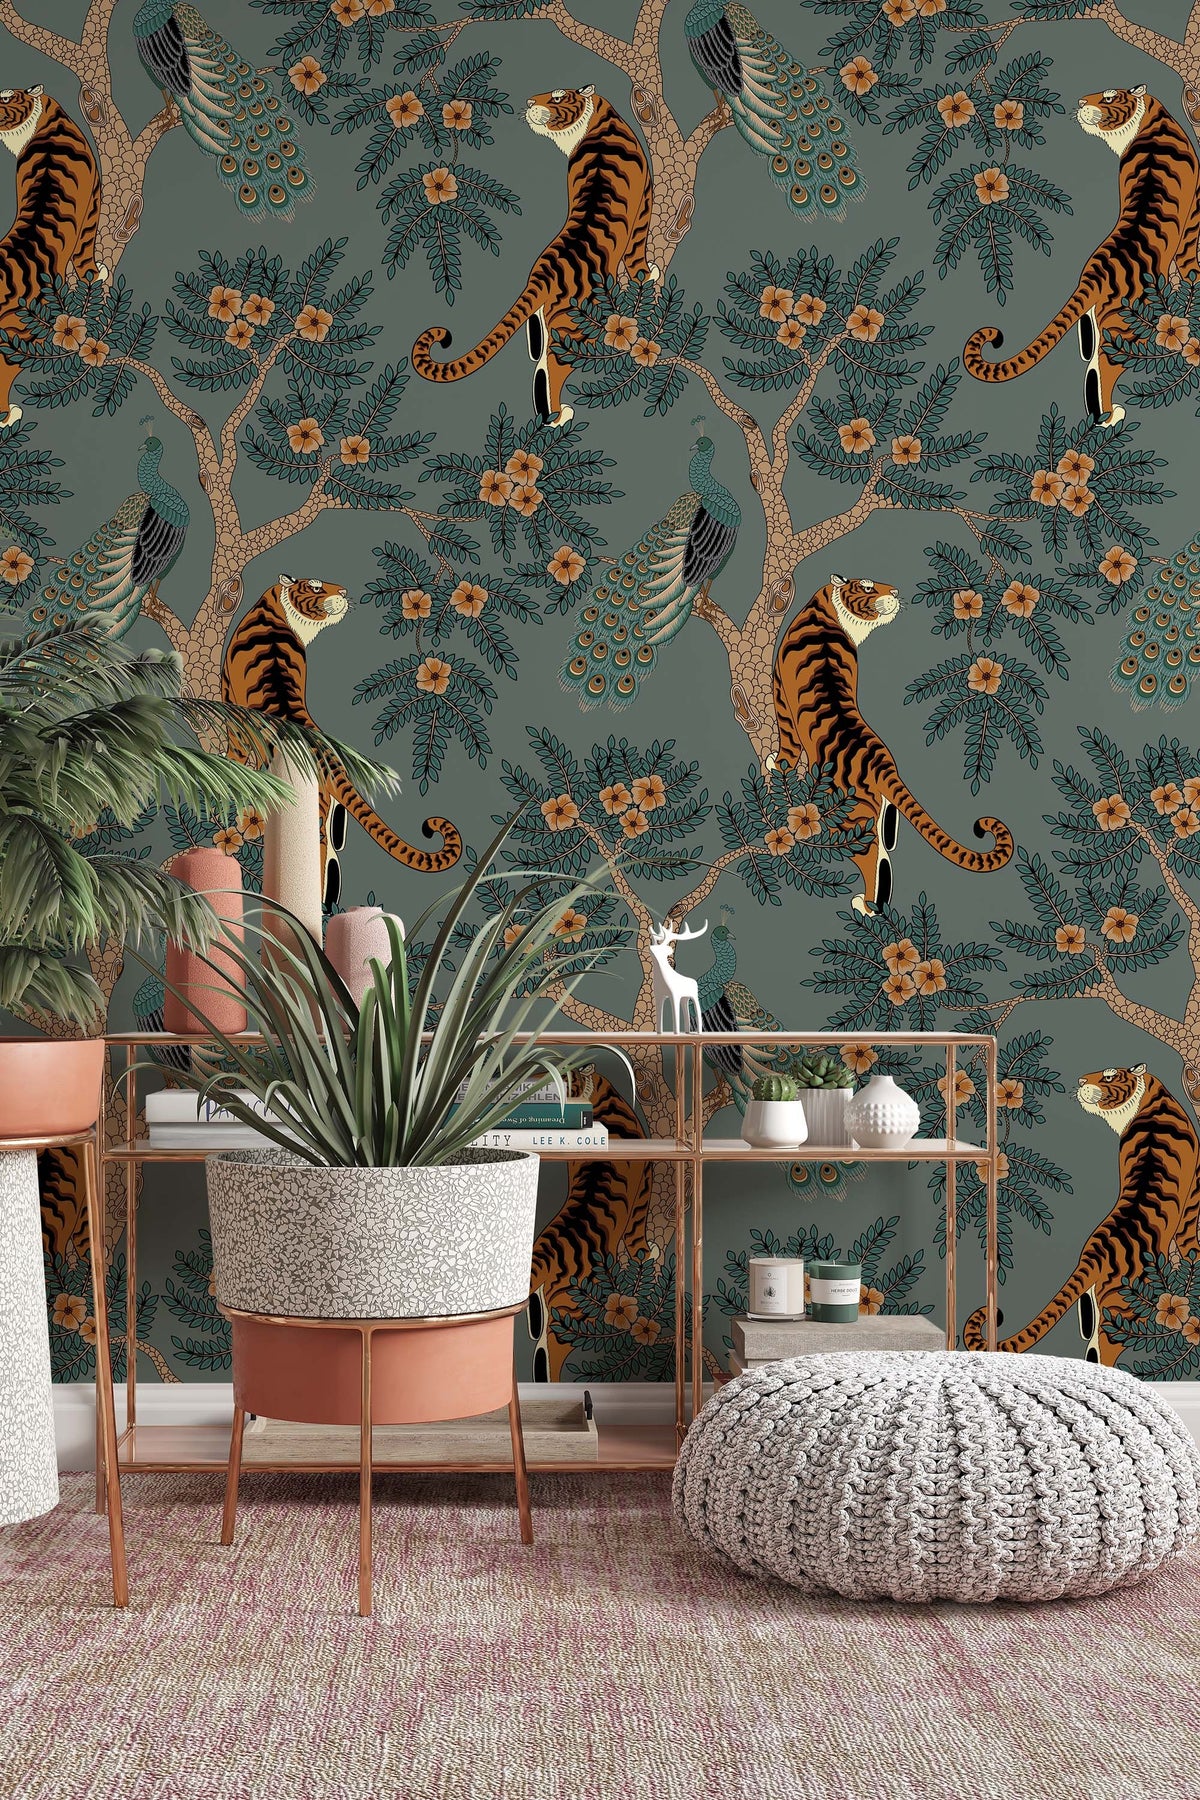 3D Abstract Peacock Feather Wallpaper Mural Peel and Stick  Etsy Australia